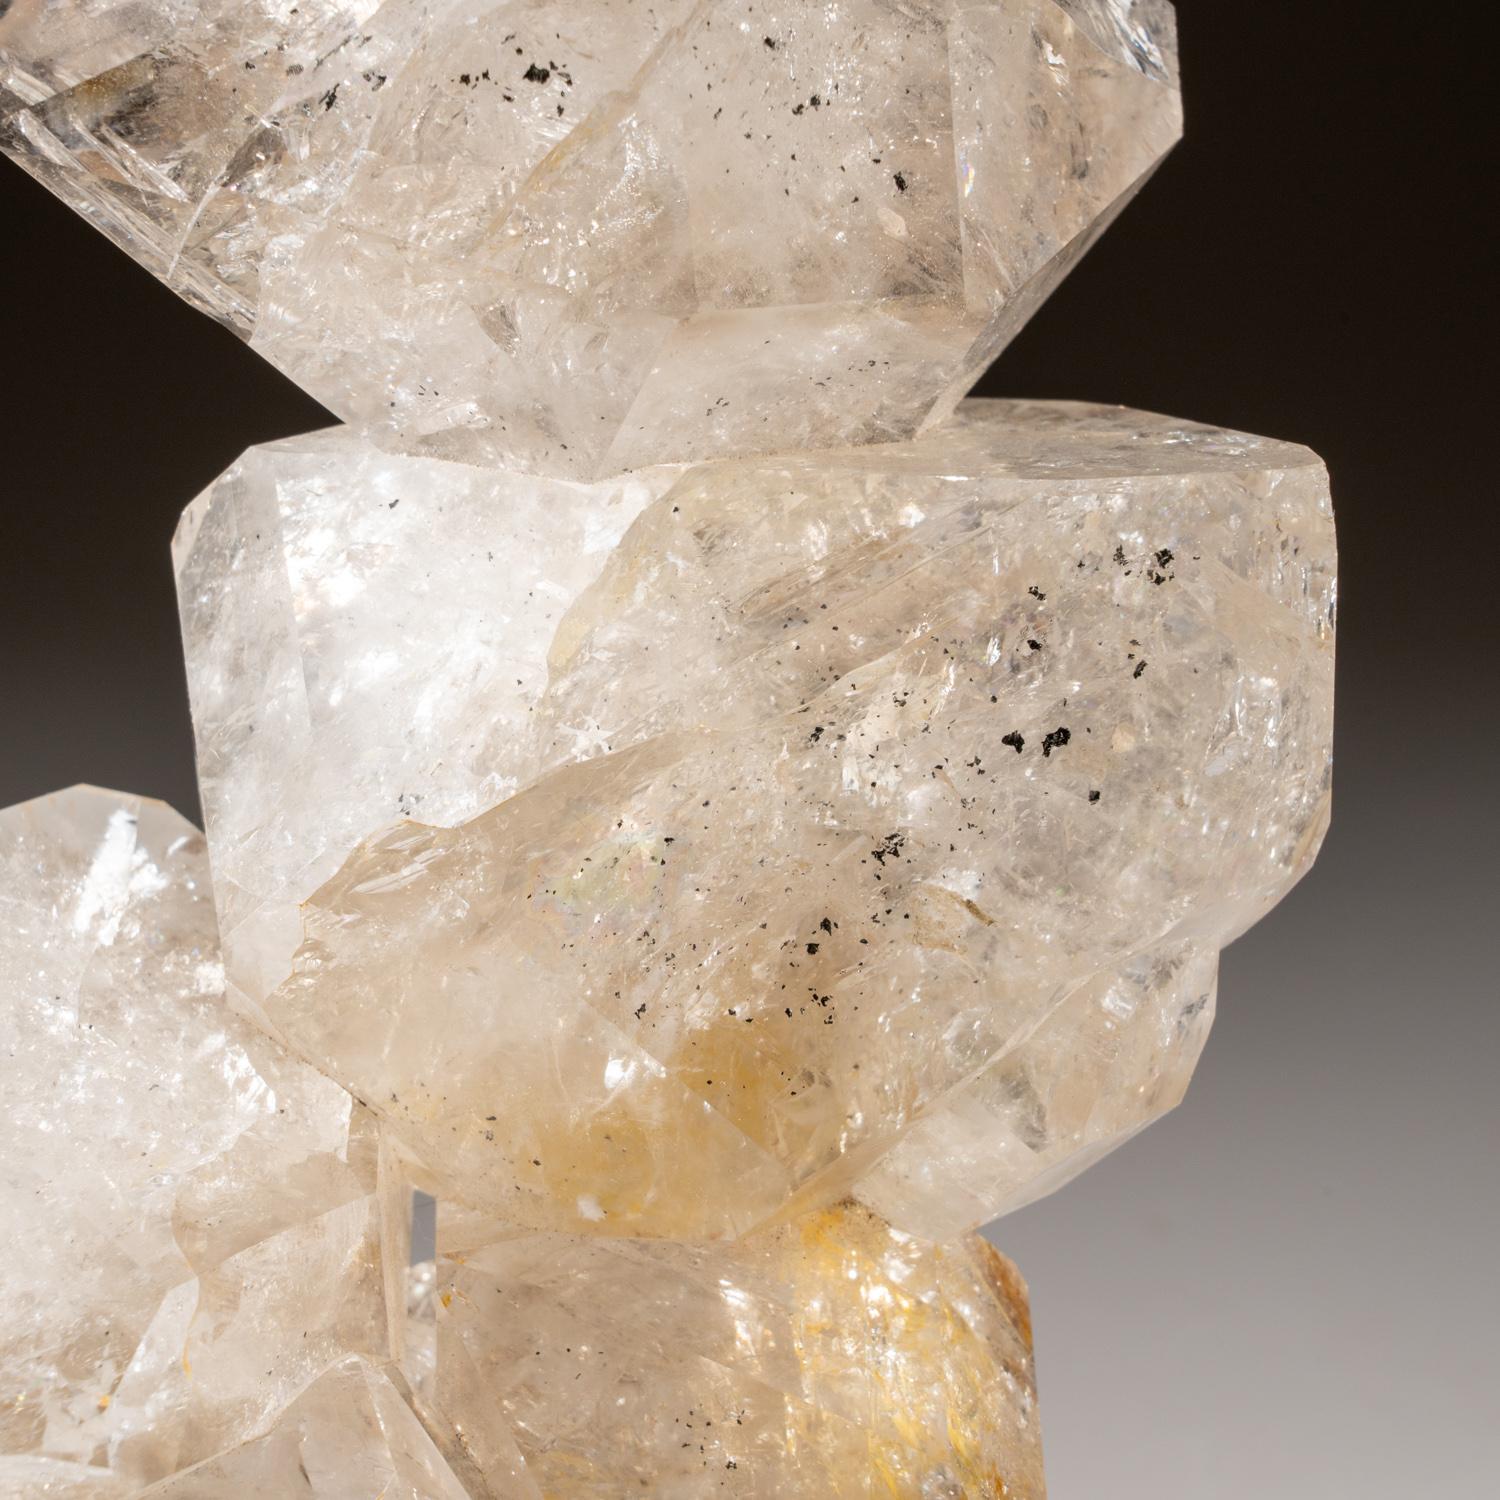 Large cluster of transparent Herkimer Diamonds, the variety of quartz crystals found in the Herkimer, N.Y. region, with minor limonite staining in some crystals. This piece has great transparency with minor inclusions and the crystal faces have a